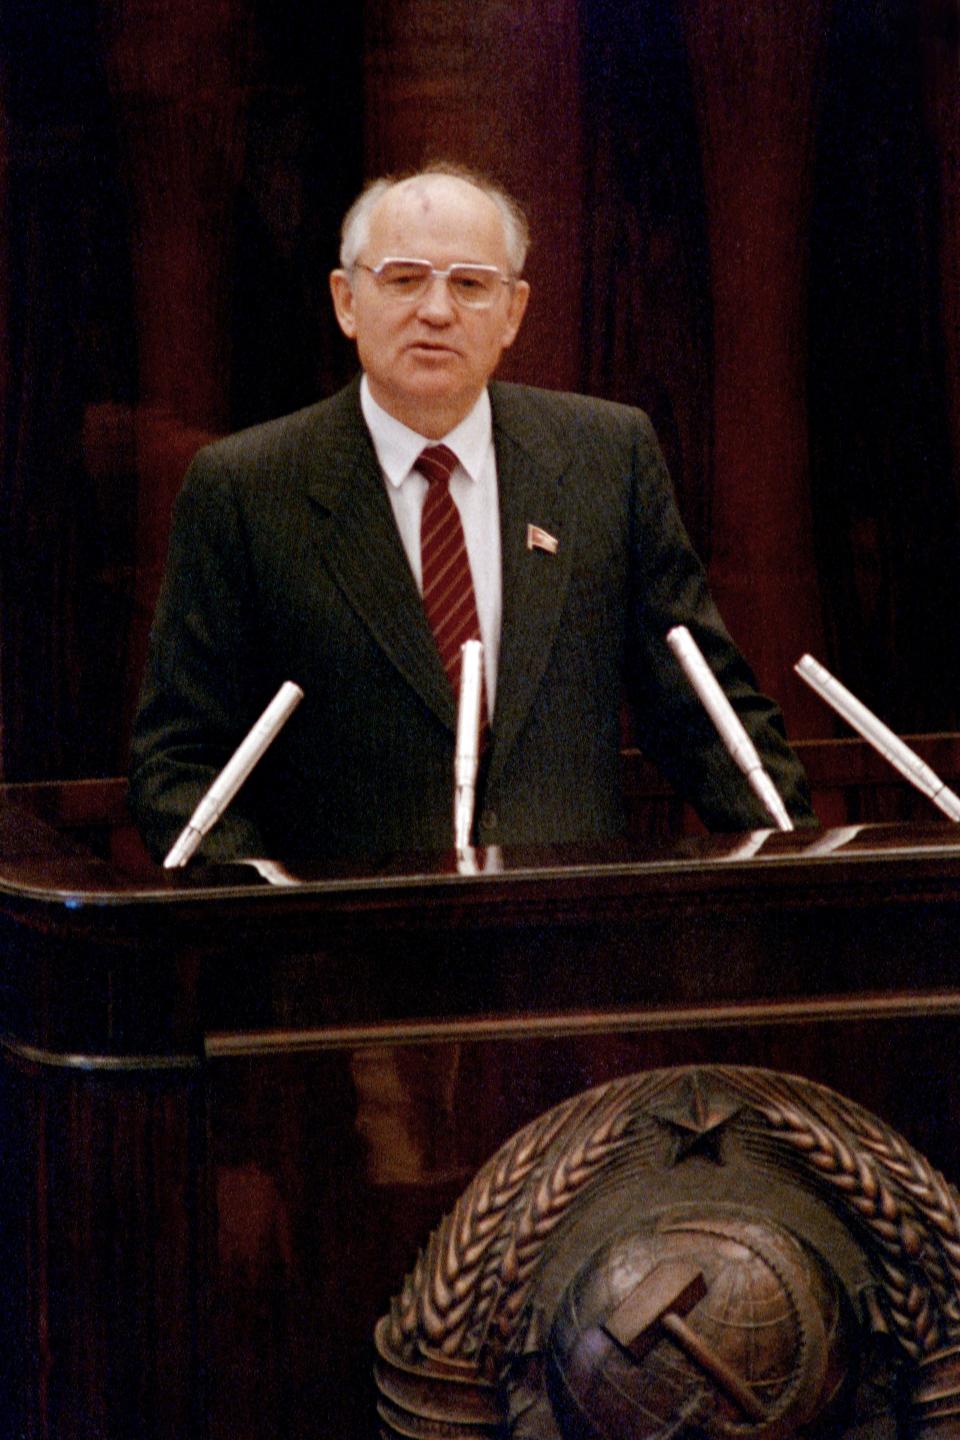 Soviet  Leader  Mikhail Gorbachev delivers a speech on November 29, 1988 in Moscow at the opening session of the Supreme Soviet at the Kremlin in Moscow. AFP PHOTO VITALY ARMAND / AFP / VITALY ARMAND        (Photo credit should read VITALY ARMAND/AFP via Getty Images)